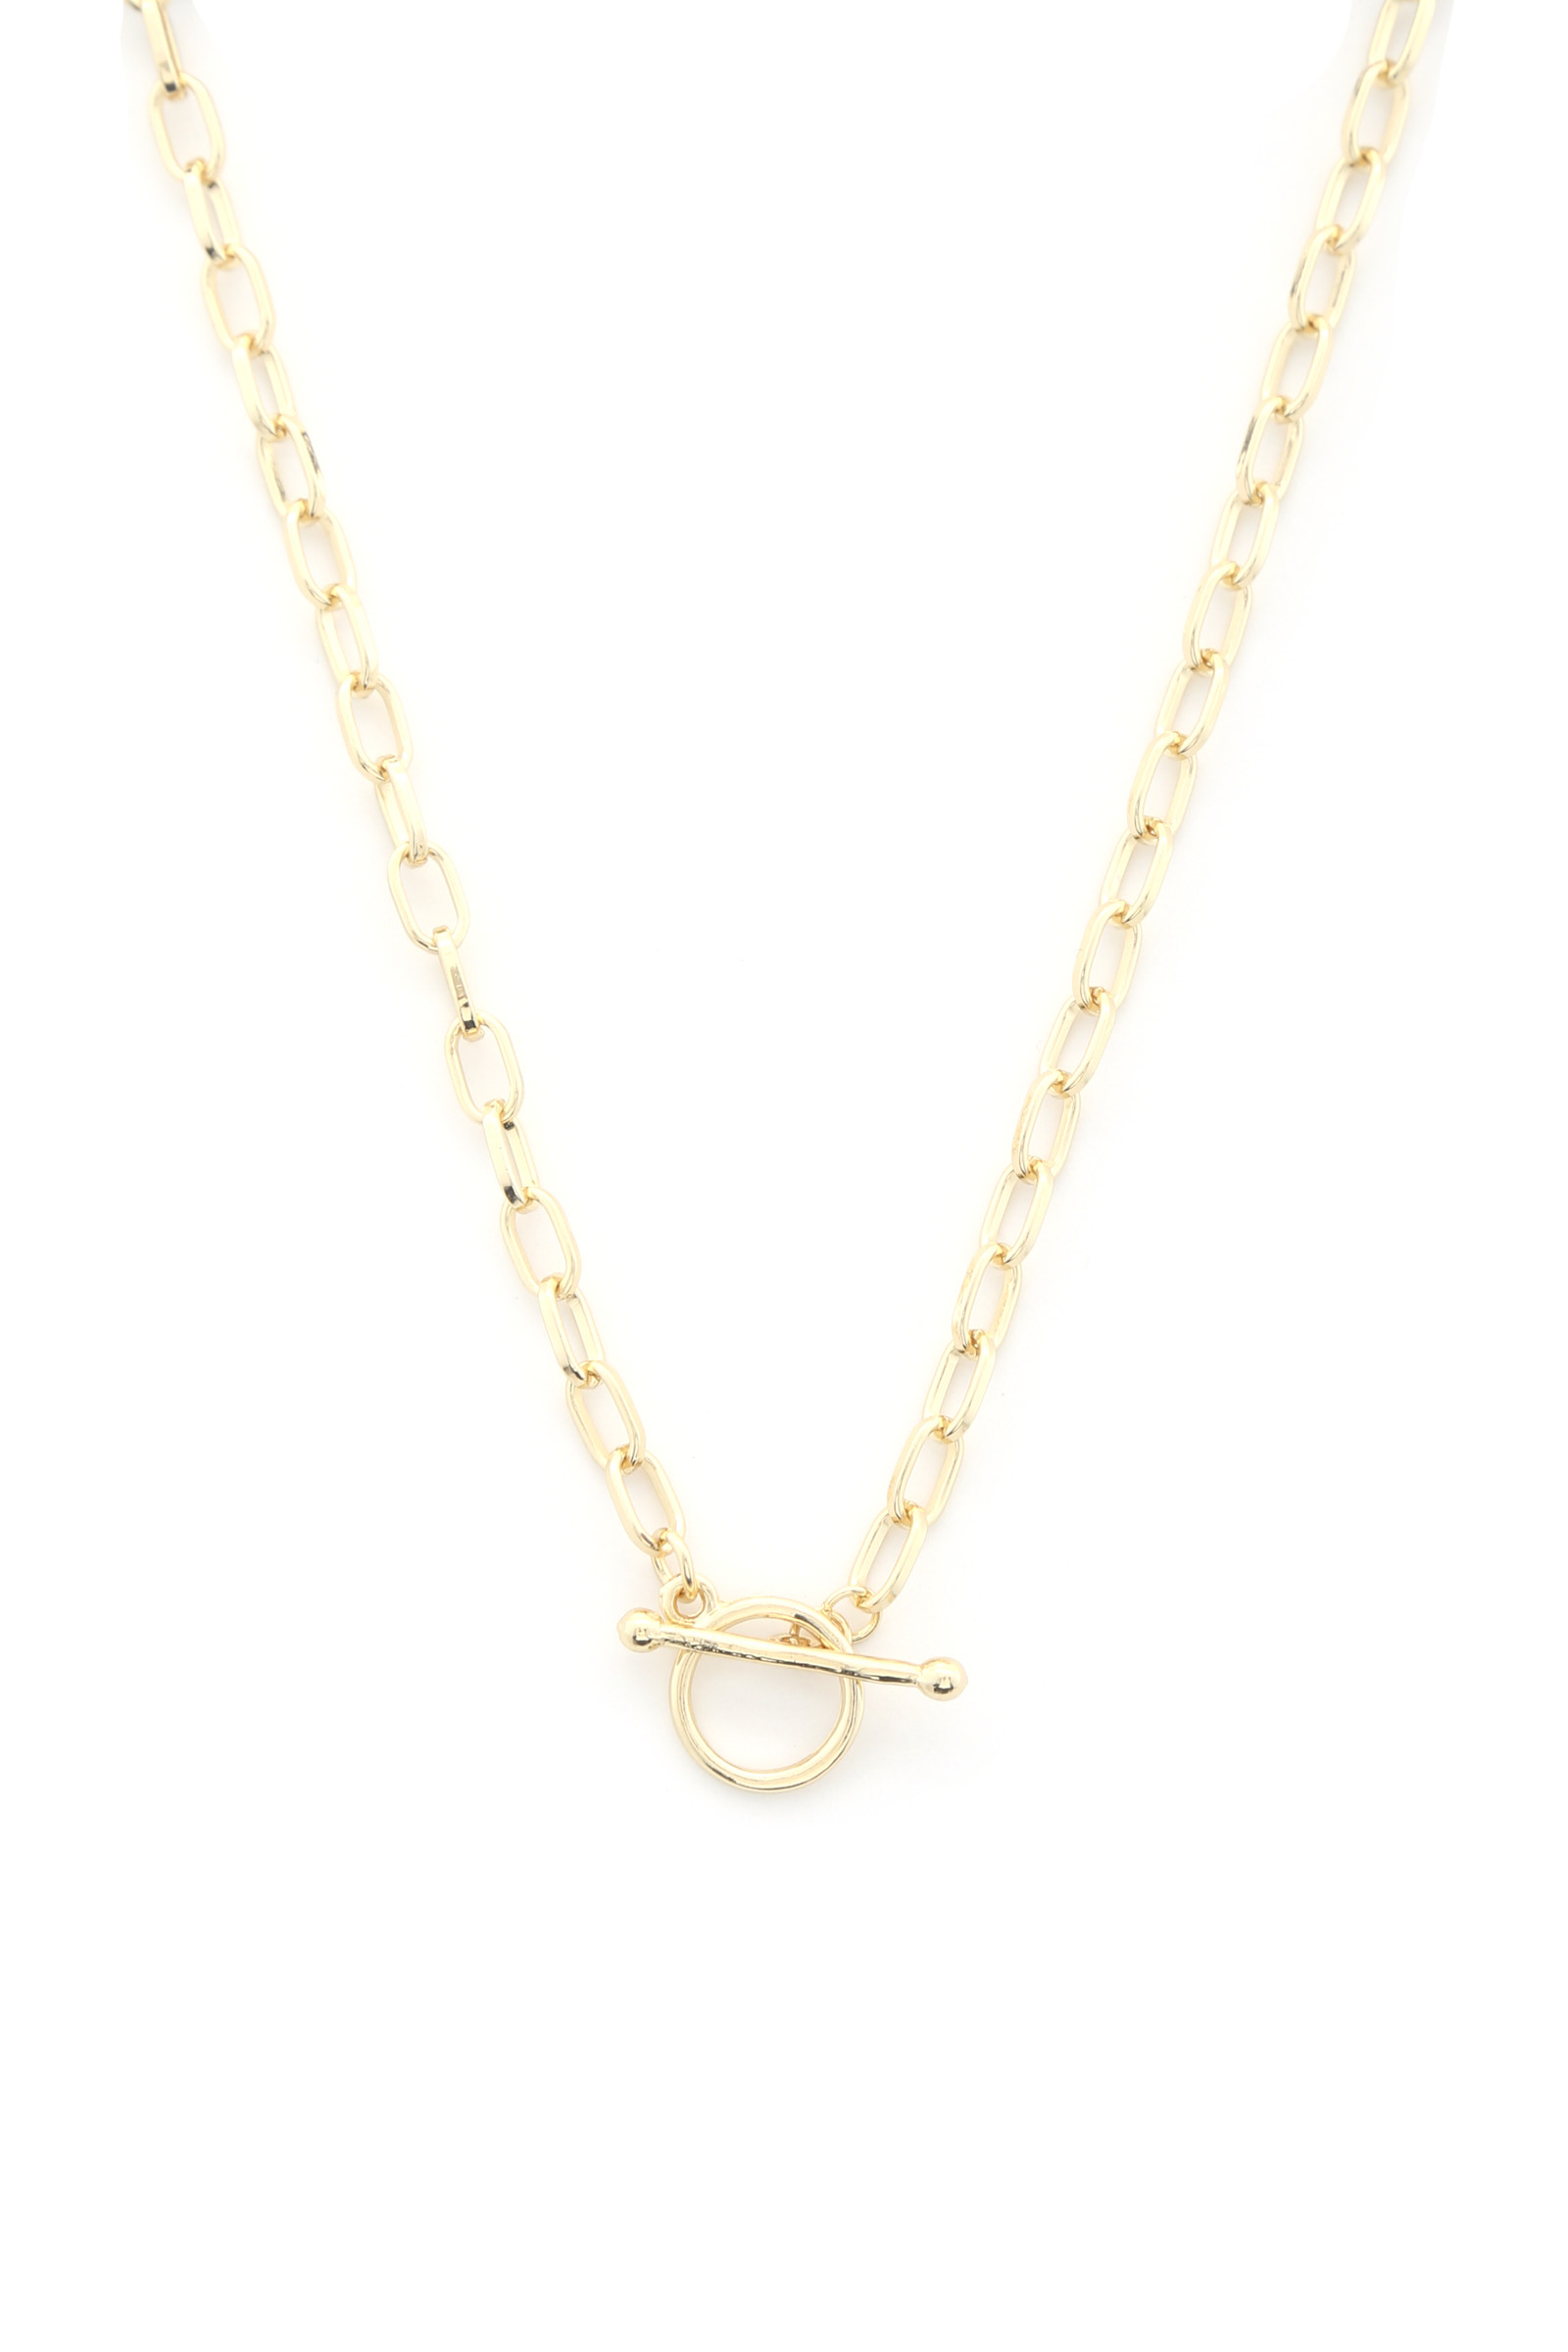 TOGGLE CLASP OVAL LINK NECKLACE